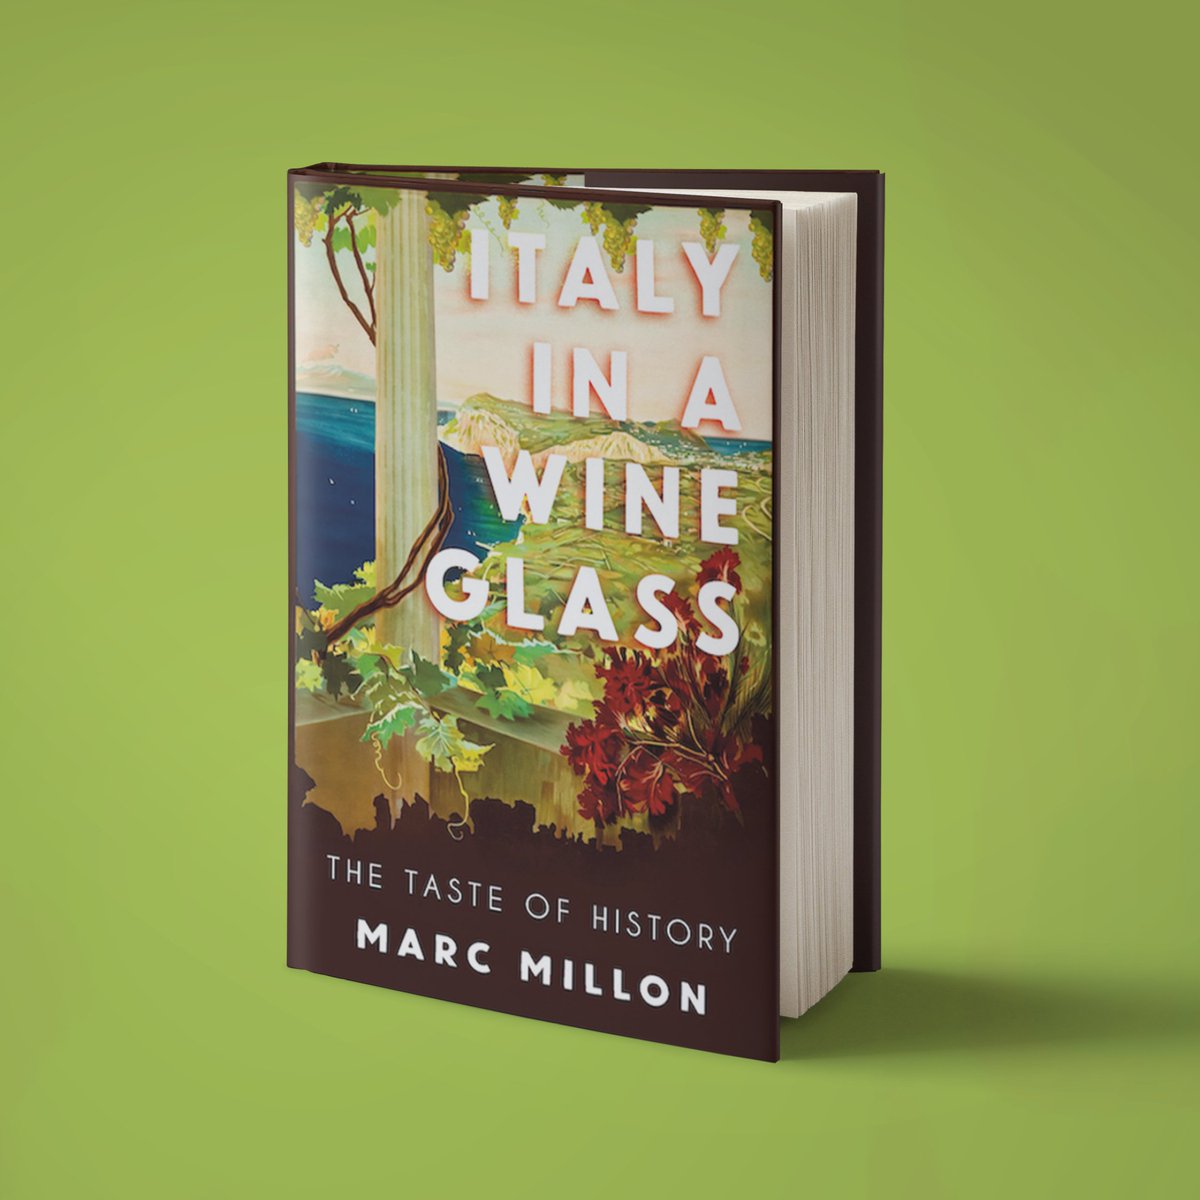 'A must-read for any lover of #Italy or #wine in general.' — @SusyAtkins 'It’s not often that a wine writer can engross and enthrall you with the history of a culture.' — @ozclarke #ItalyInAWineglass by @Marc_Millon is out today! 25% off w/code WINE25: tinyurl.com/ywpfndnc